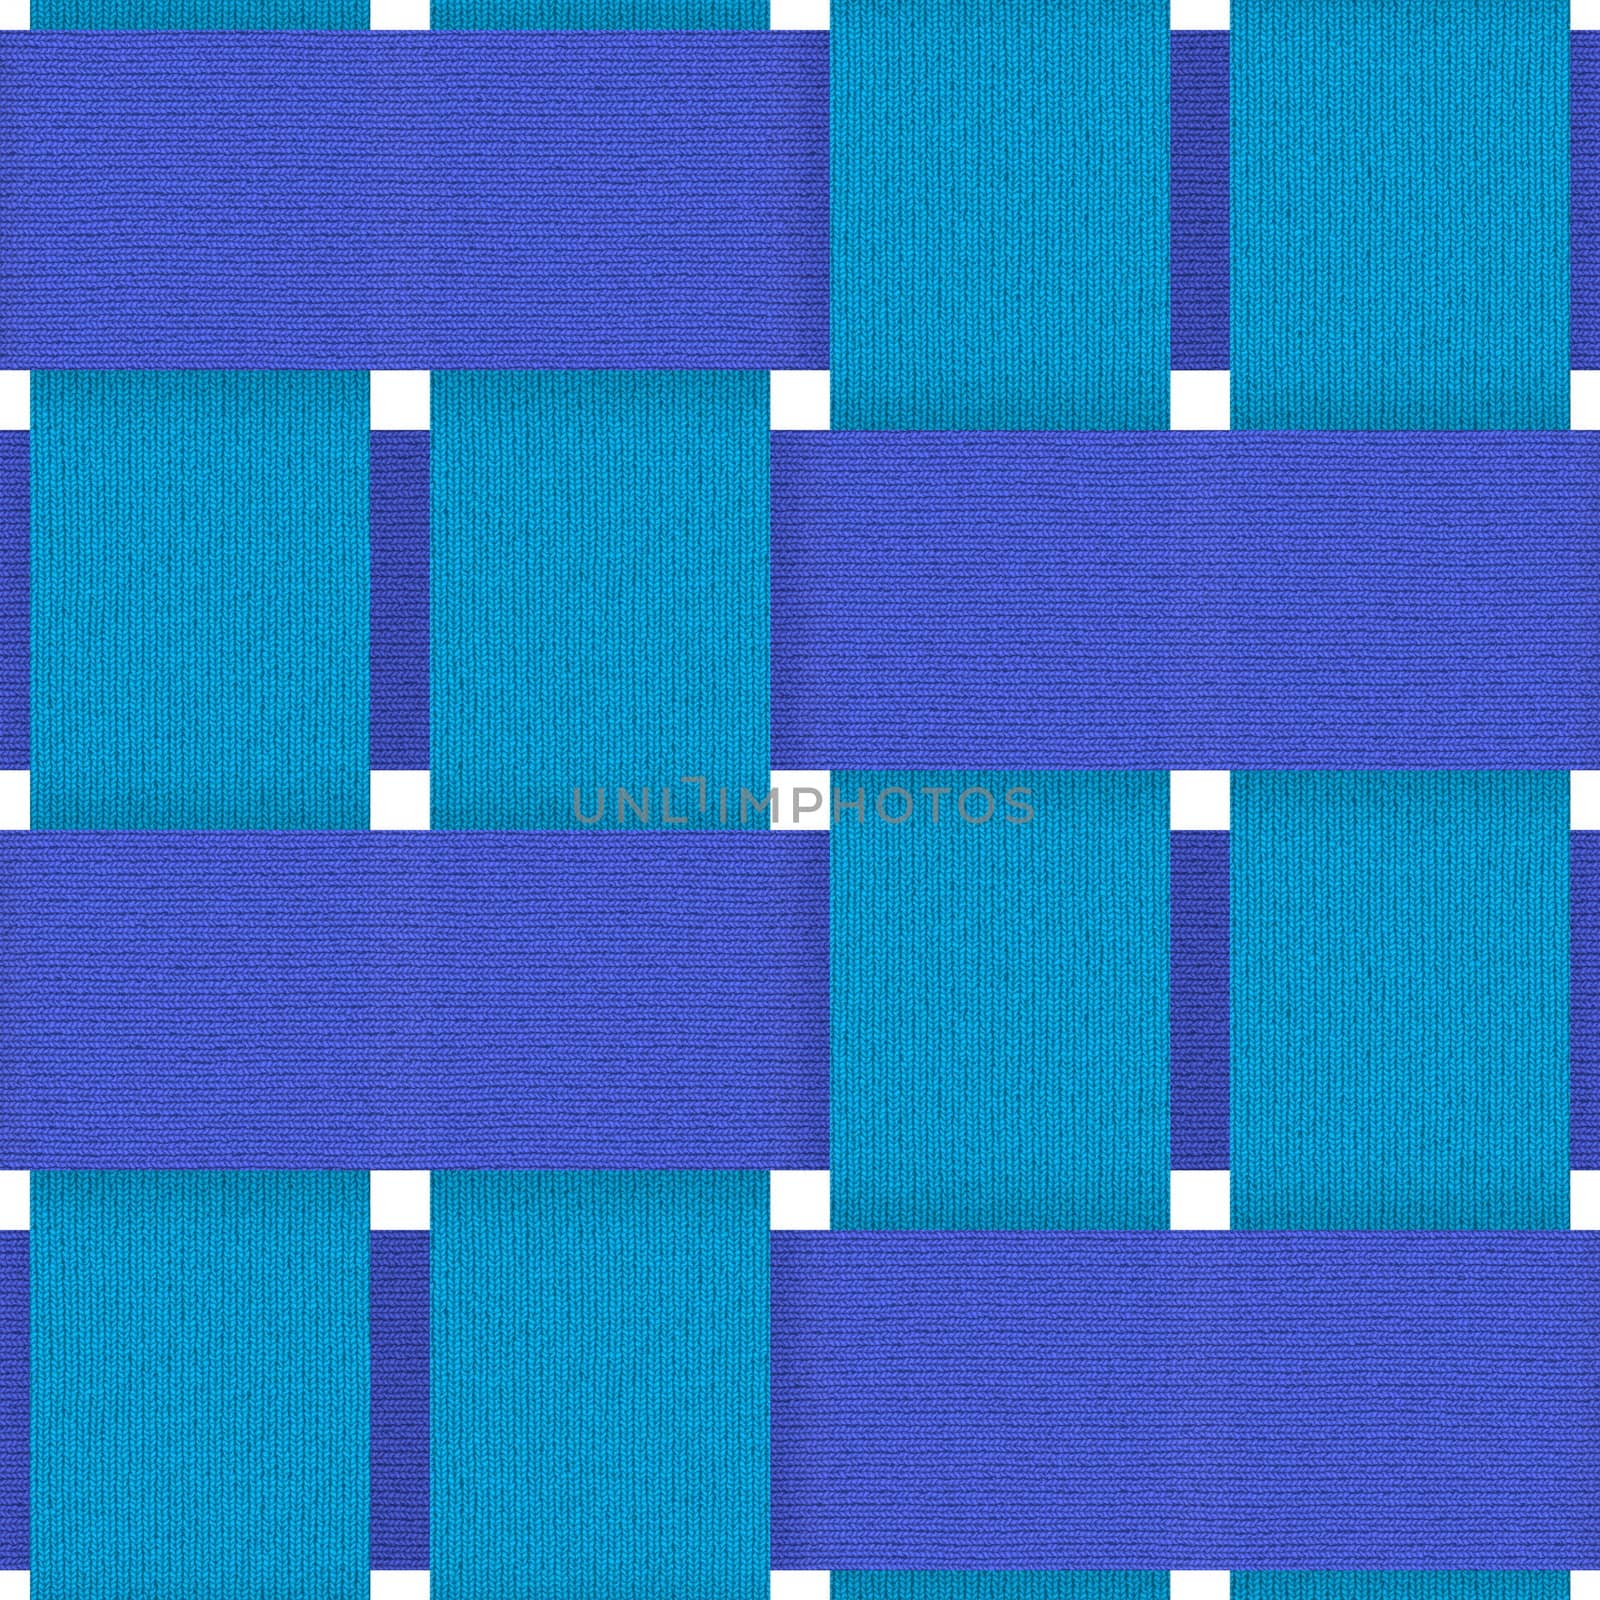 shades of blue fabric weave seamless background pattern